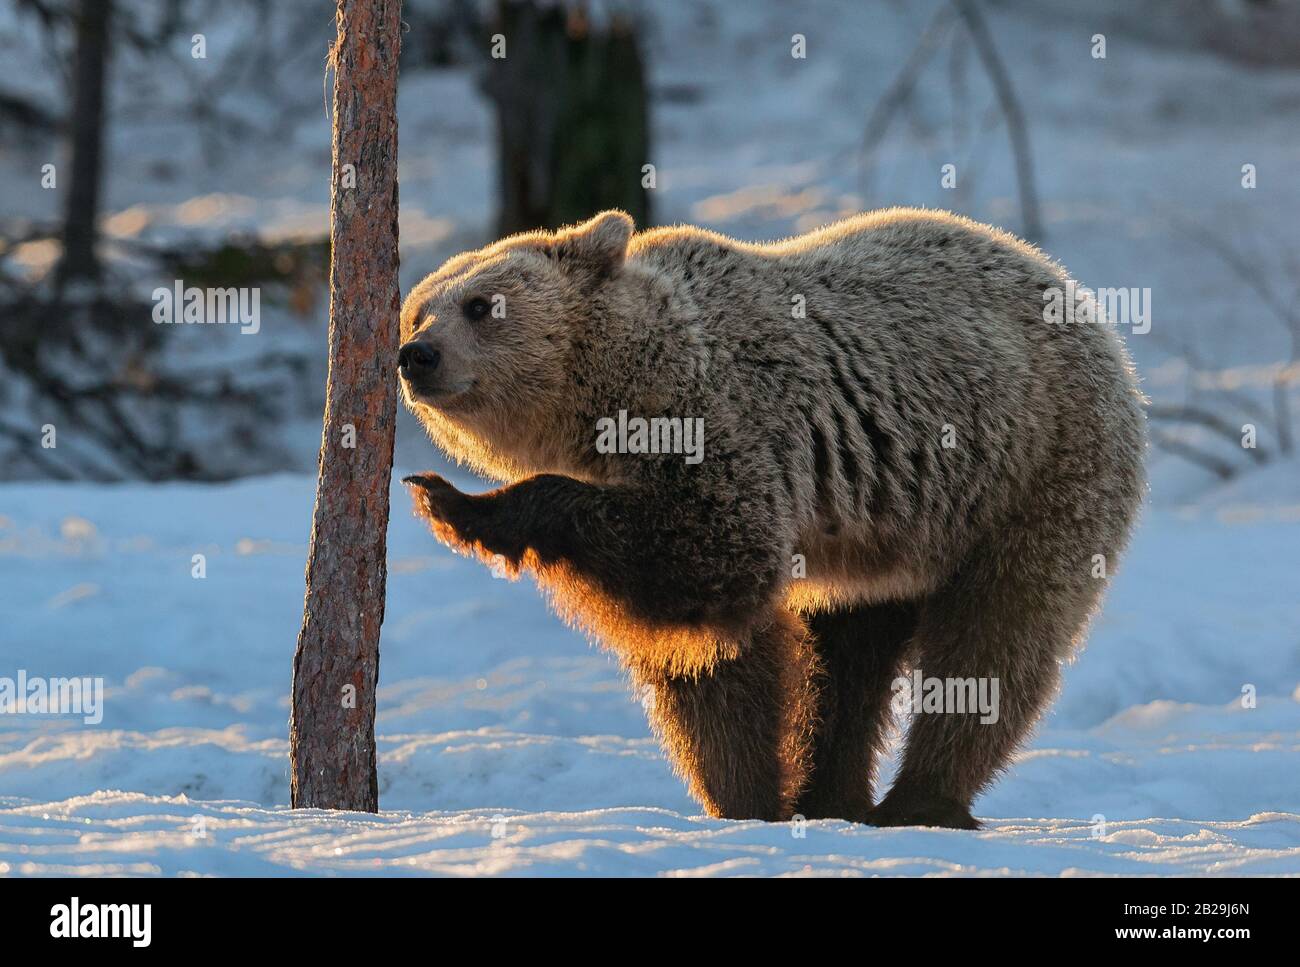 The bear sniffs a tree. Brown bear in the winter forest at sunset. Scientific name: Ursus arctos. Natural habitat. Winter season. Stock Photo